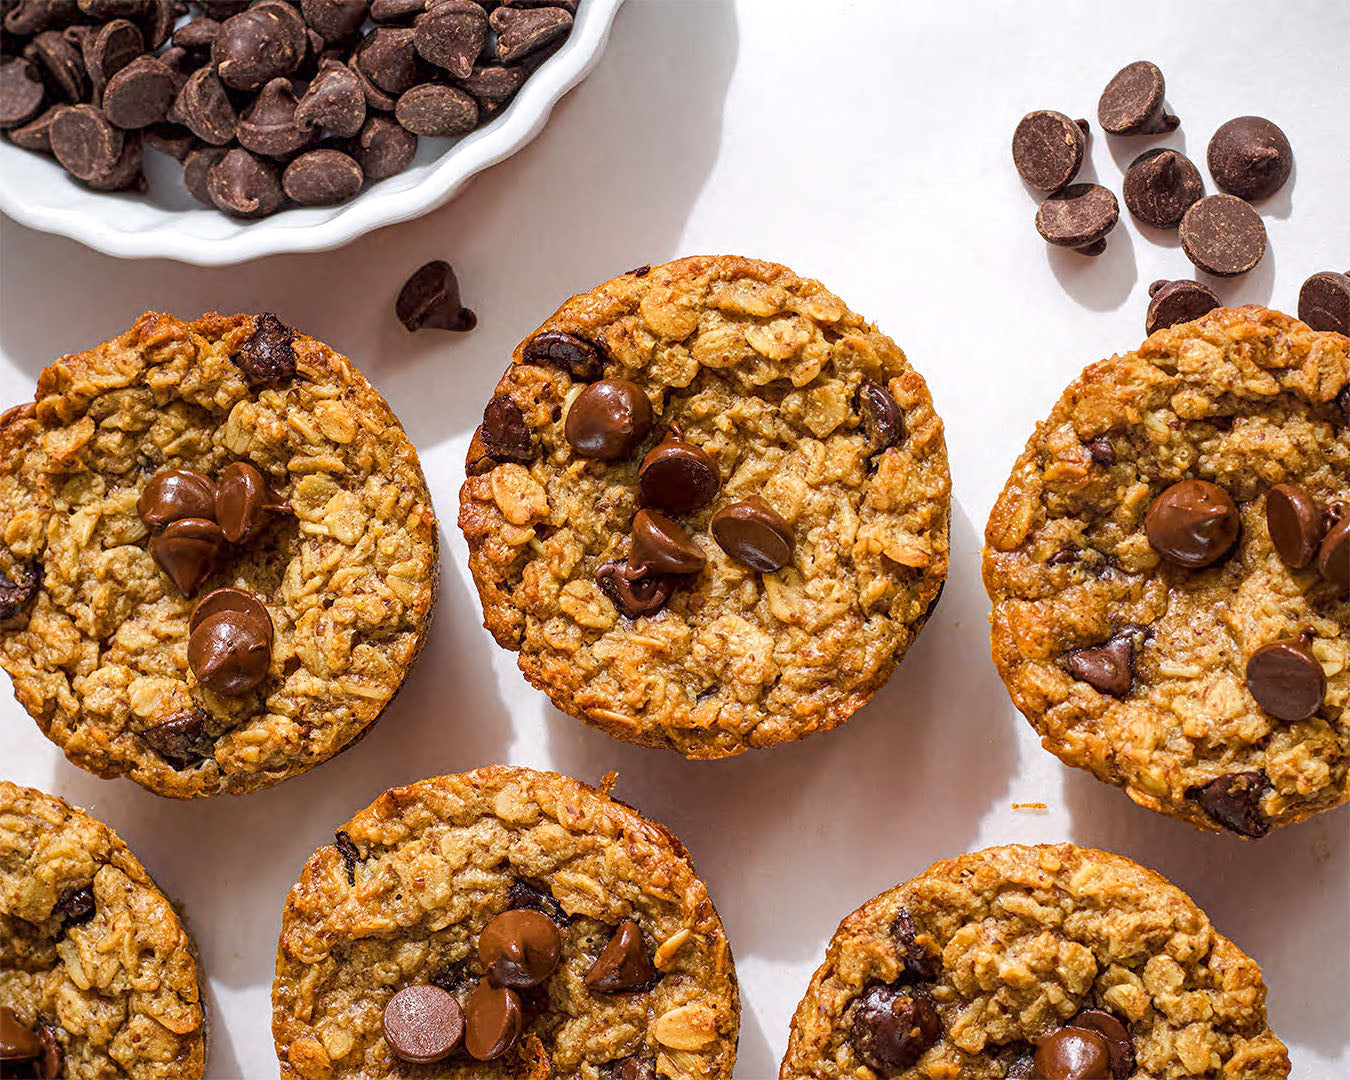 Baked Chocolate Chip Oatmeal Cups